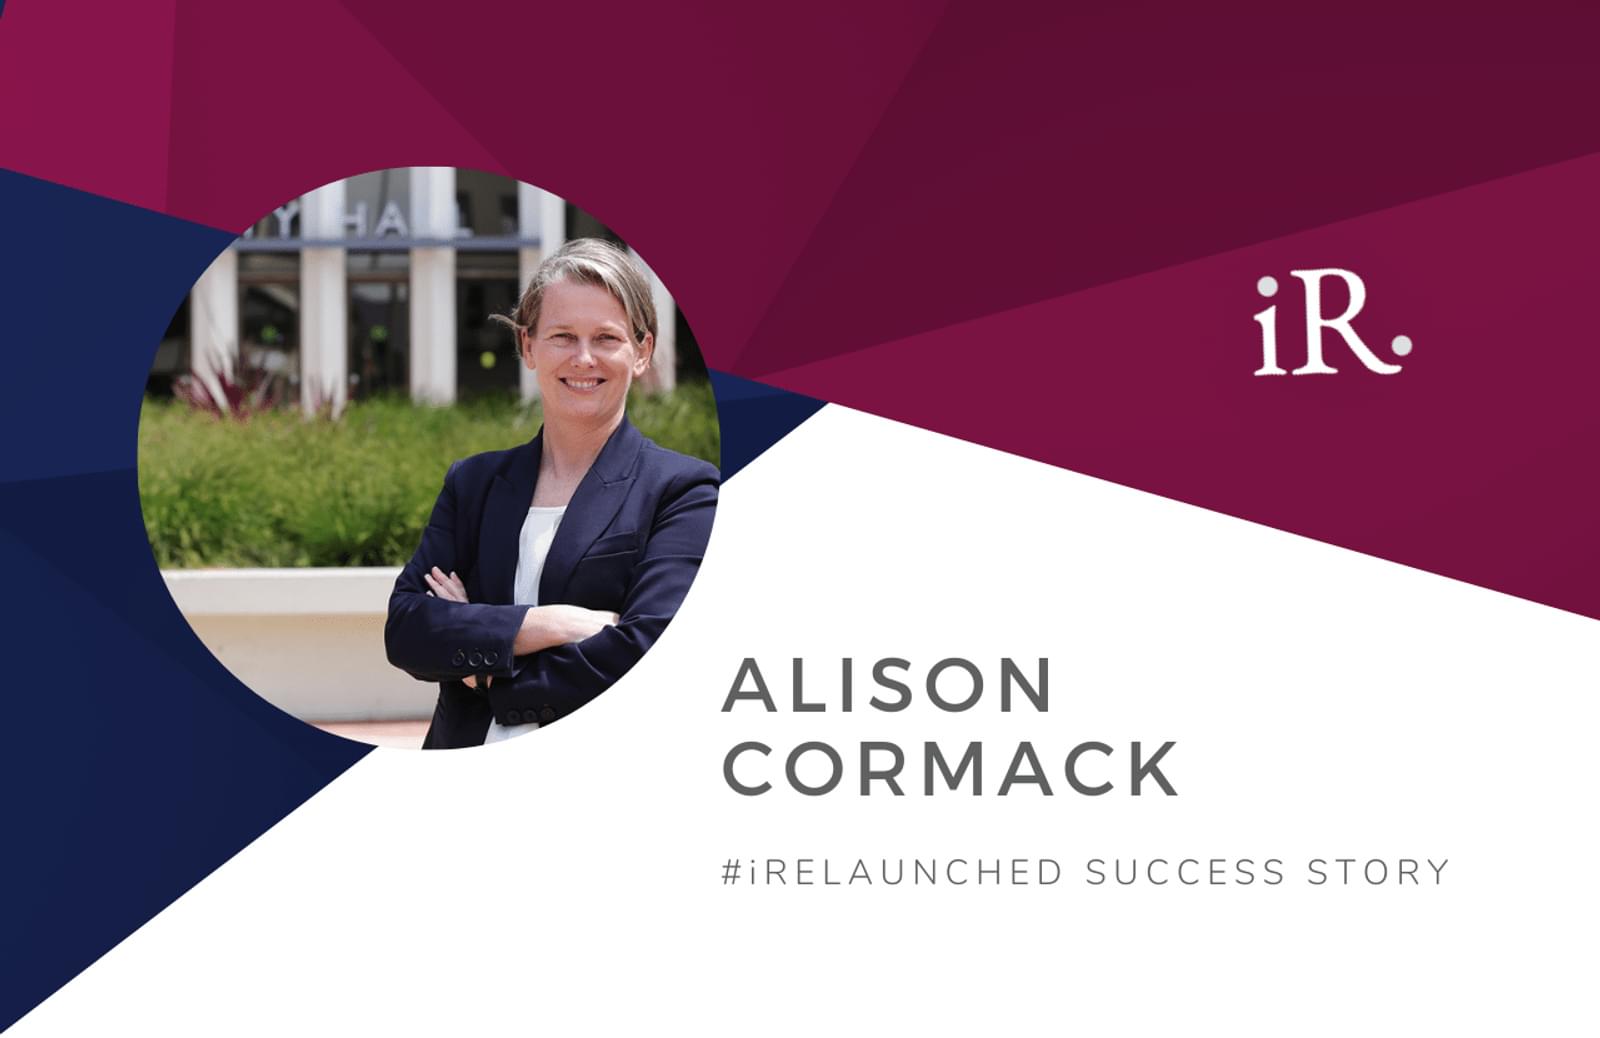 Alison Cormack's headshot and the text #iRelaunched Success Story along with the iRelaunch logo.  A navy and maroon geometric textured background intersect behind Alison's headshot.